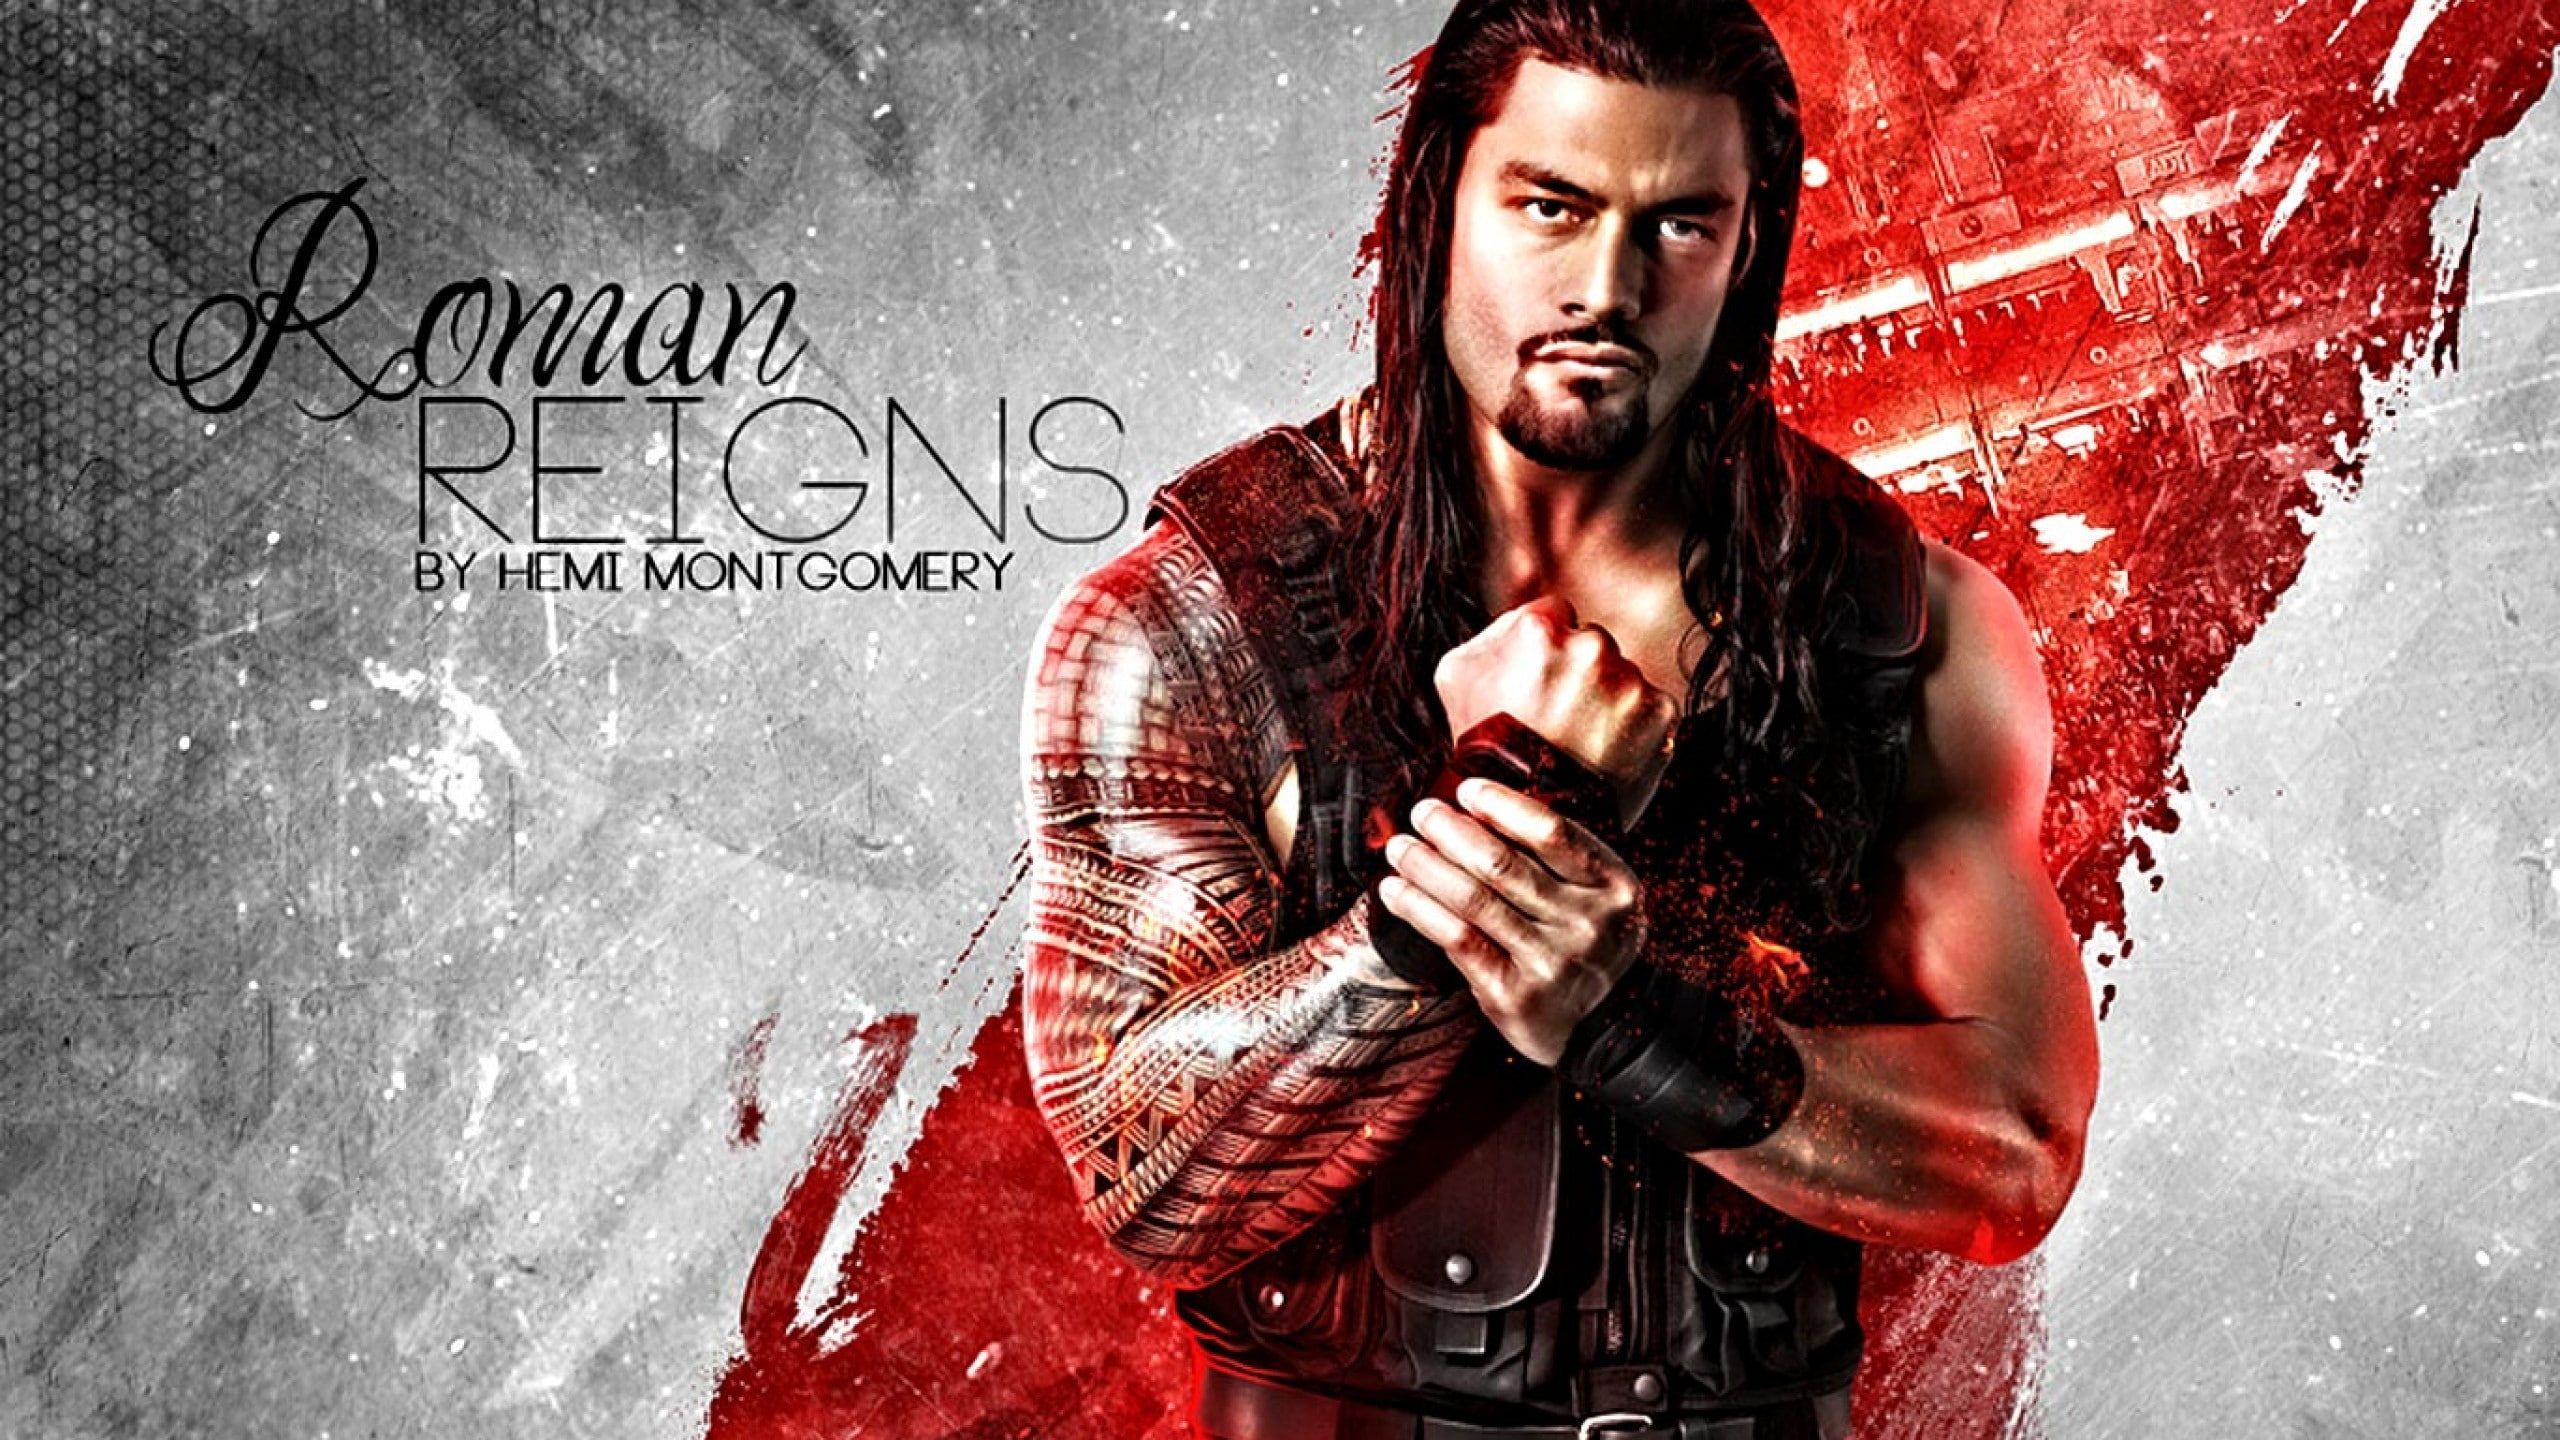 wwe roman reigns game download for pc